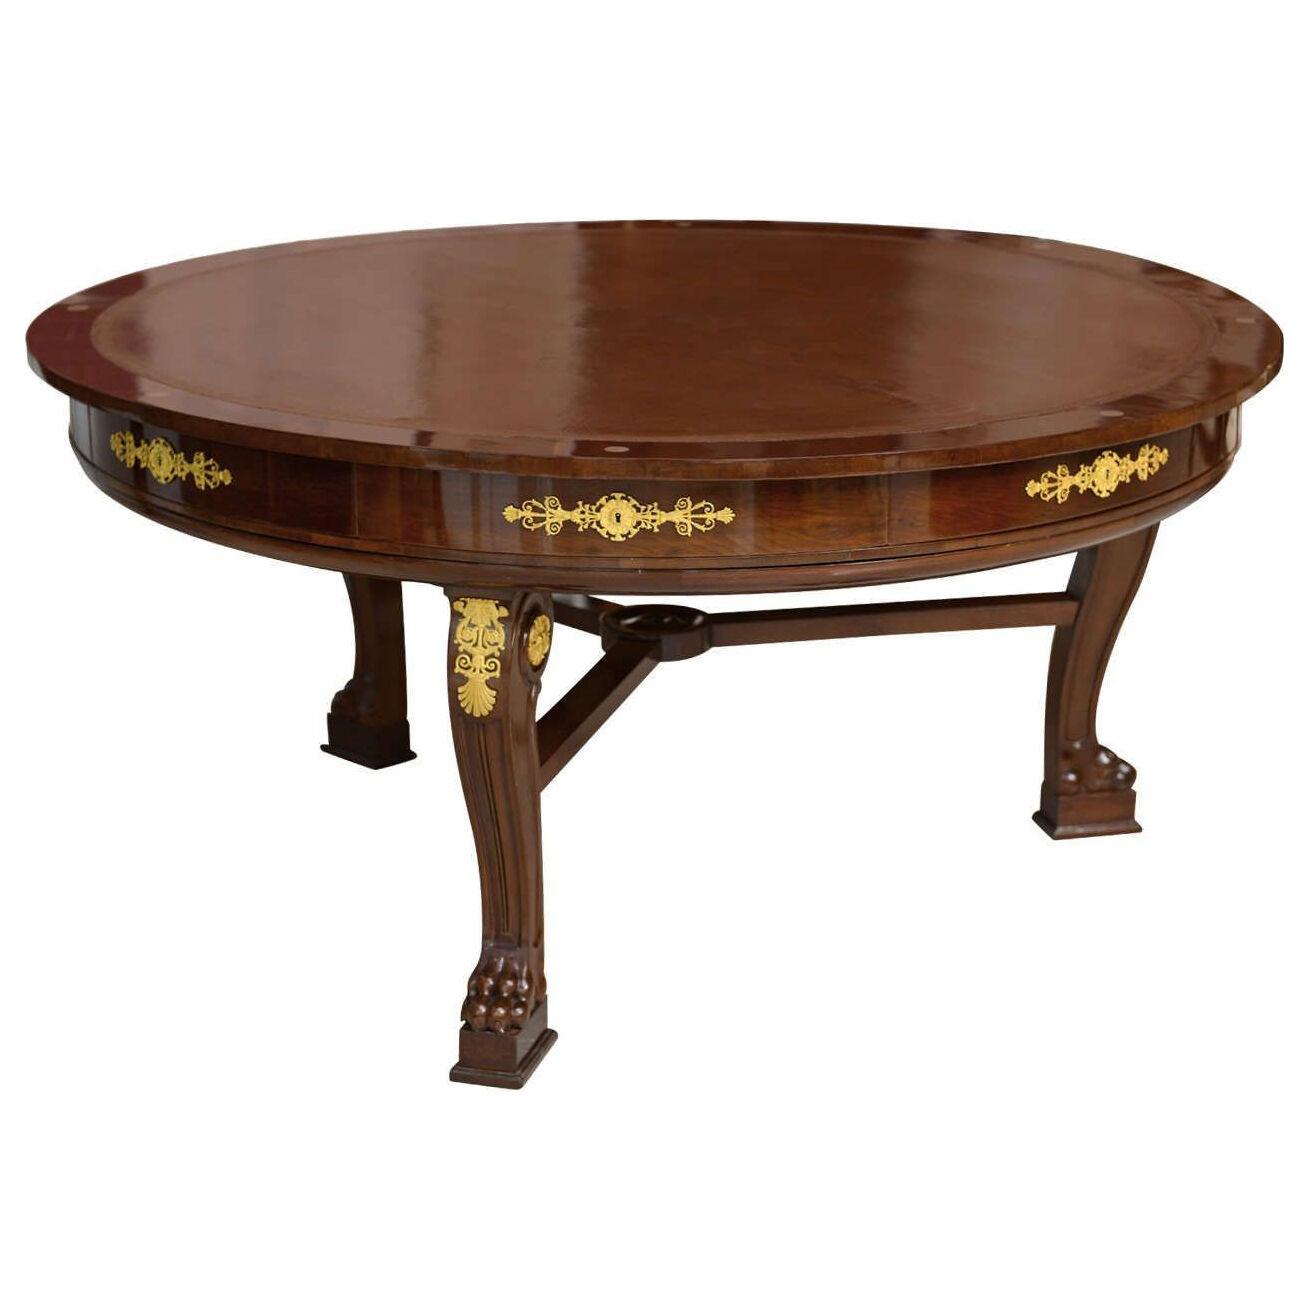 Very Fine French Empire Mahogany and Ormolu Mounted Rent Table, Potheau